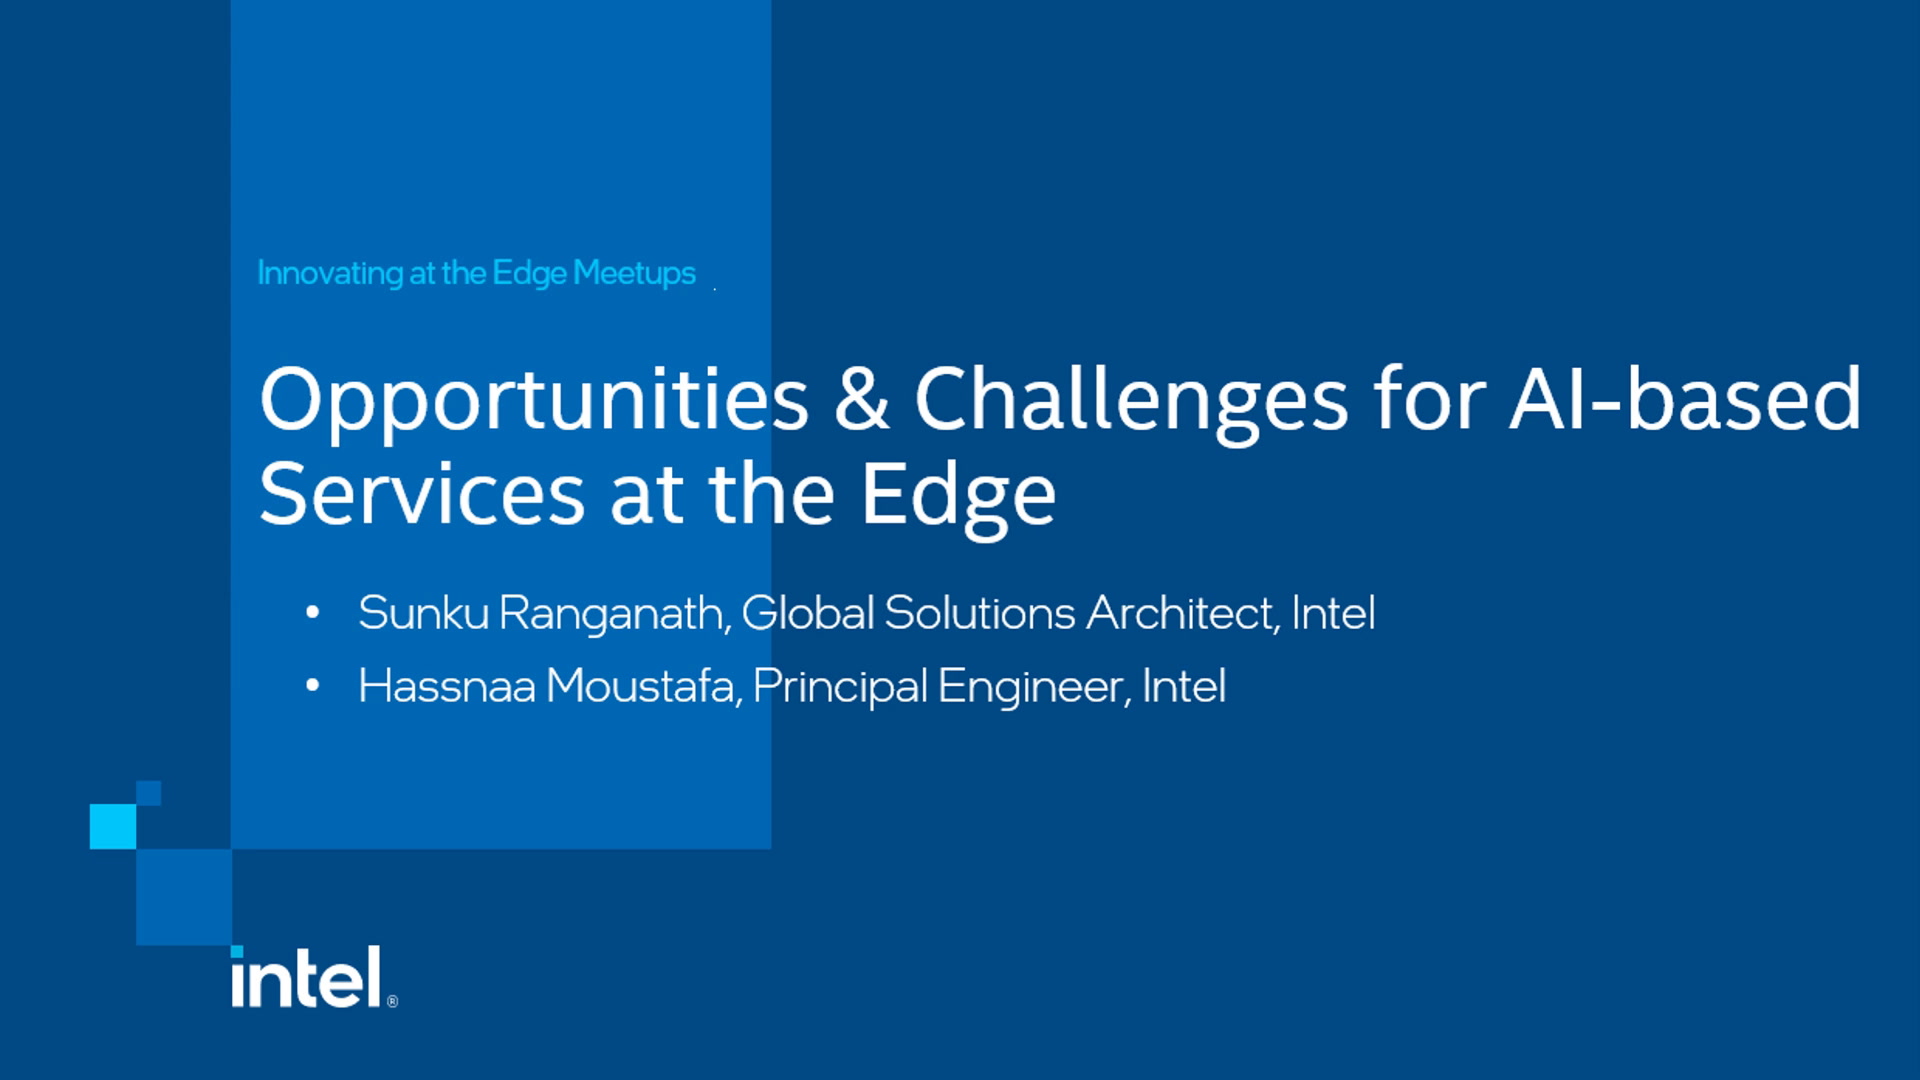 Opportunities & Challenges for AI-based Services at the Edge